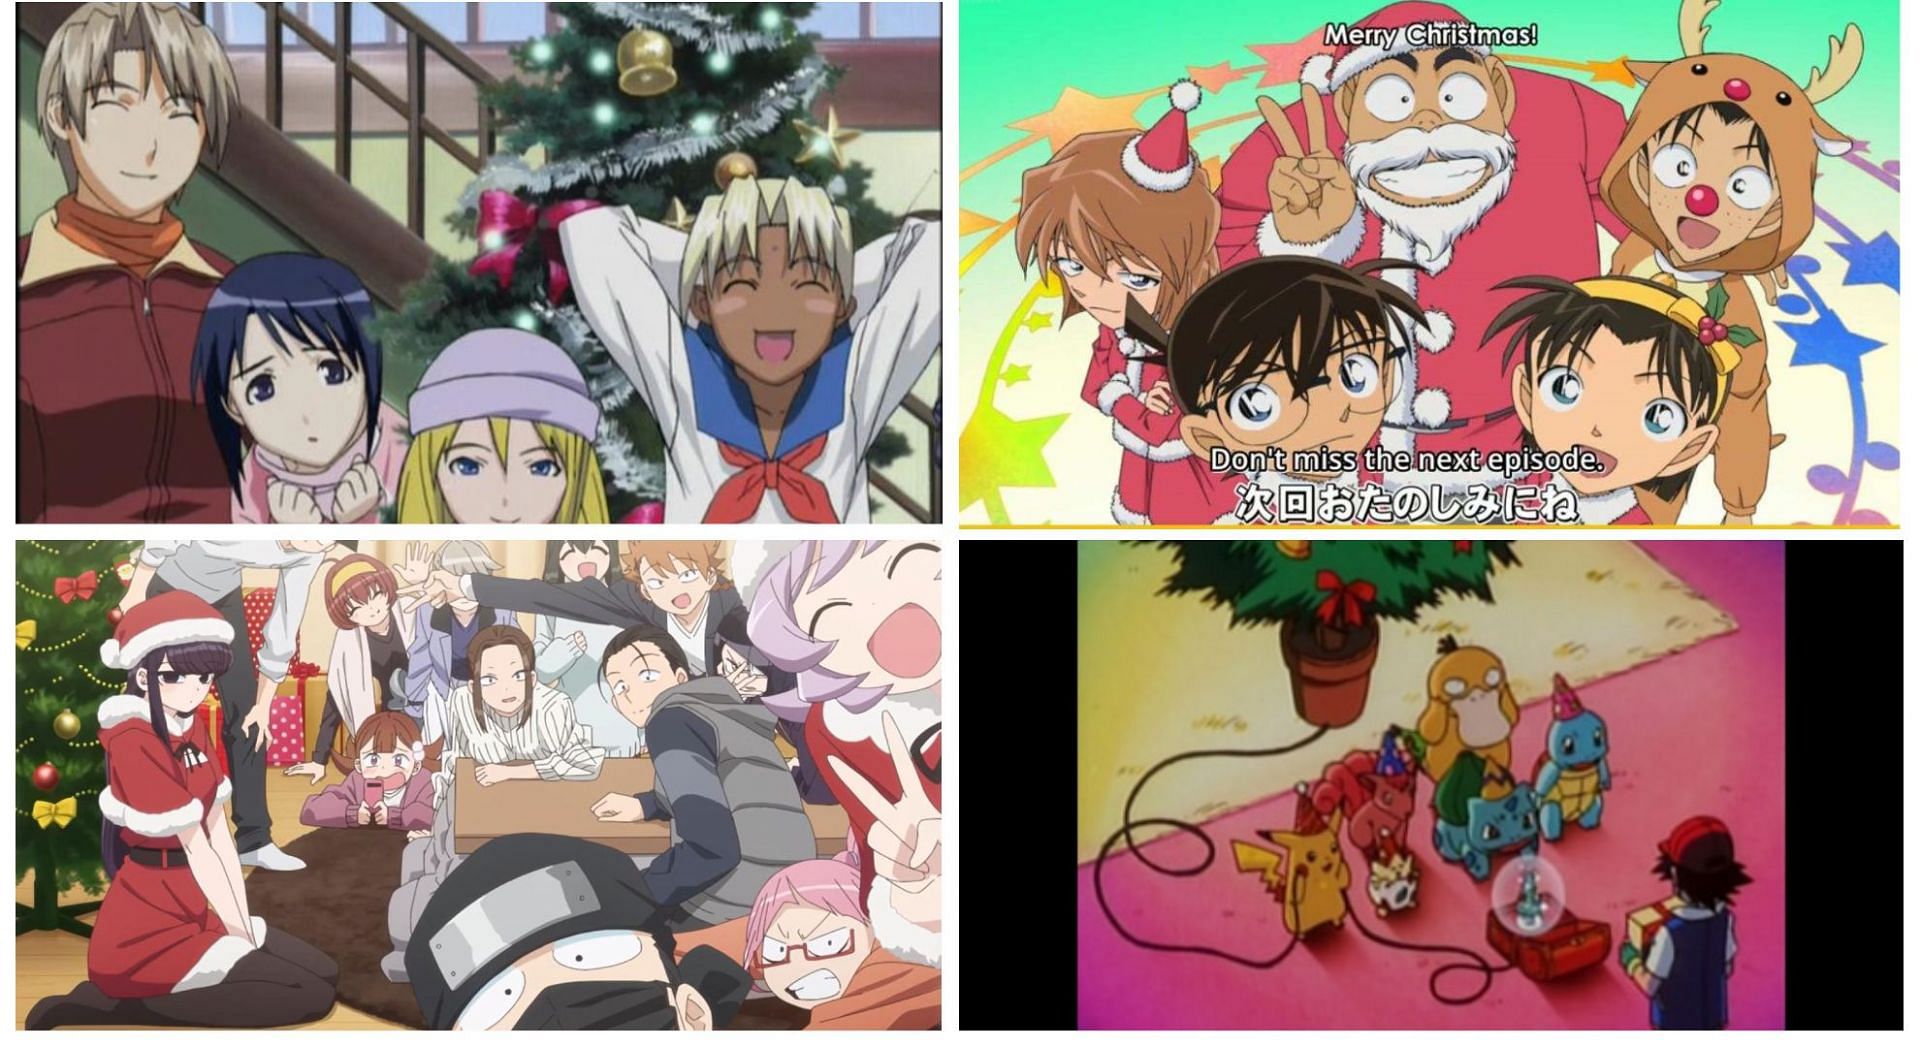 15 Anime Movies to Watch During the Christmas Holidays